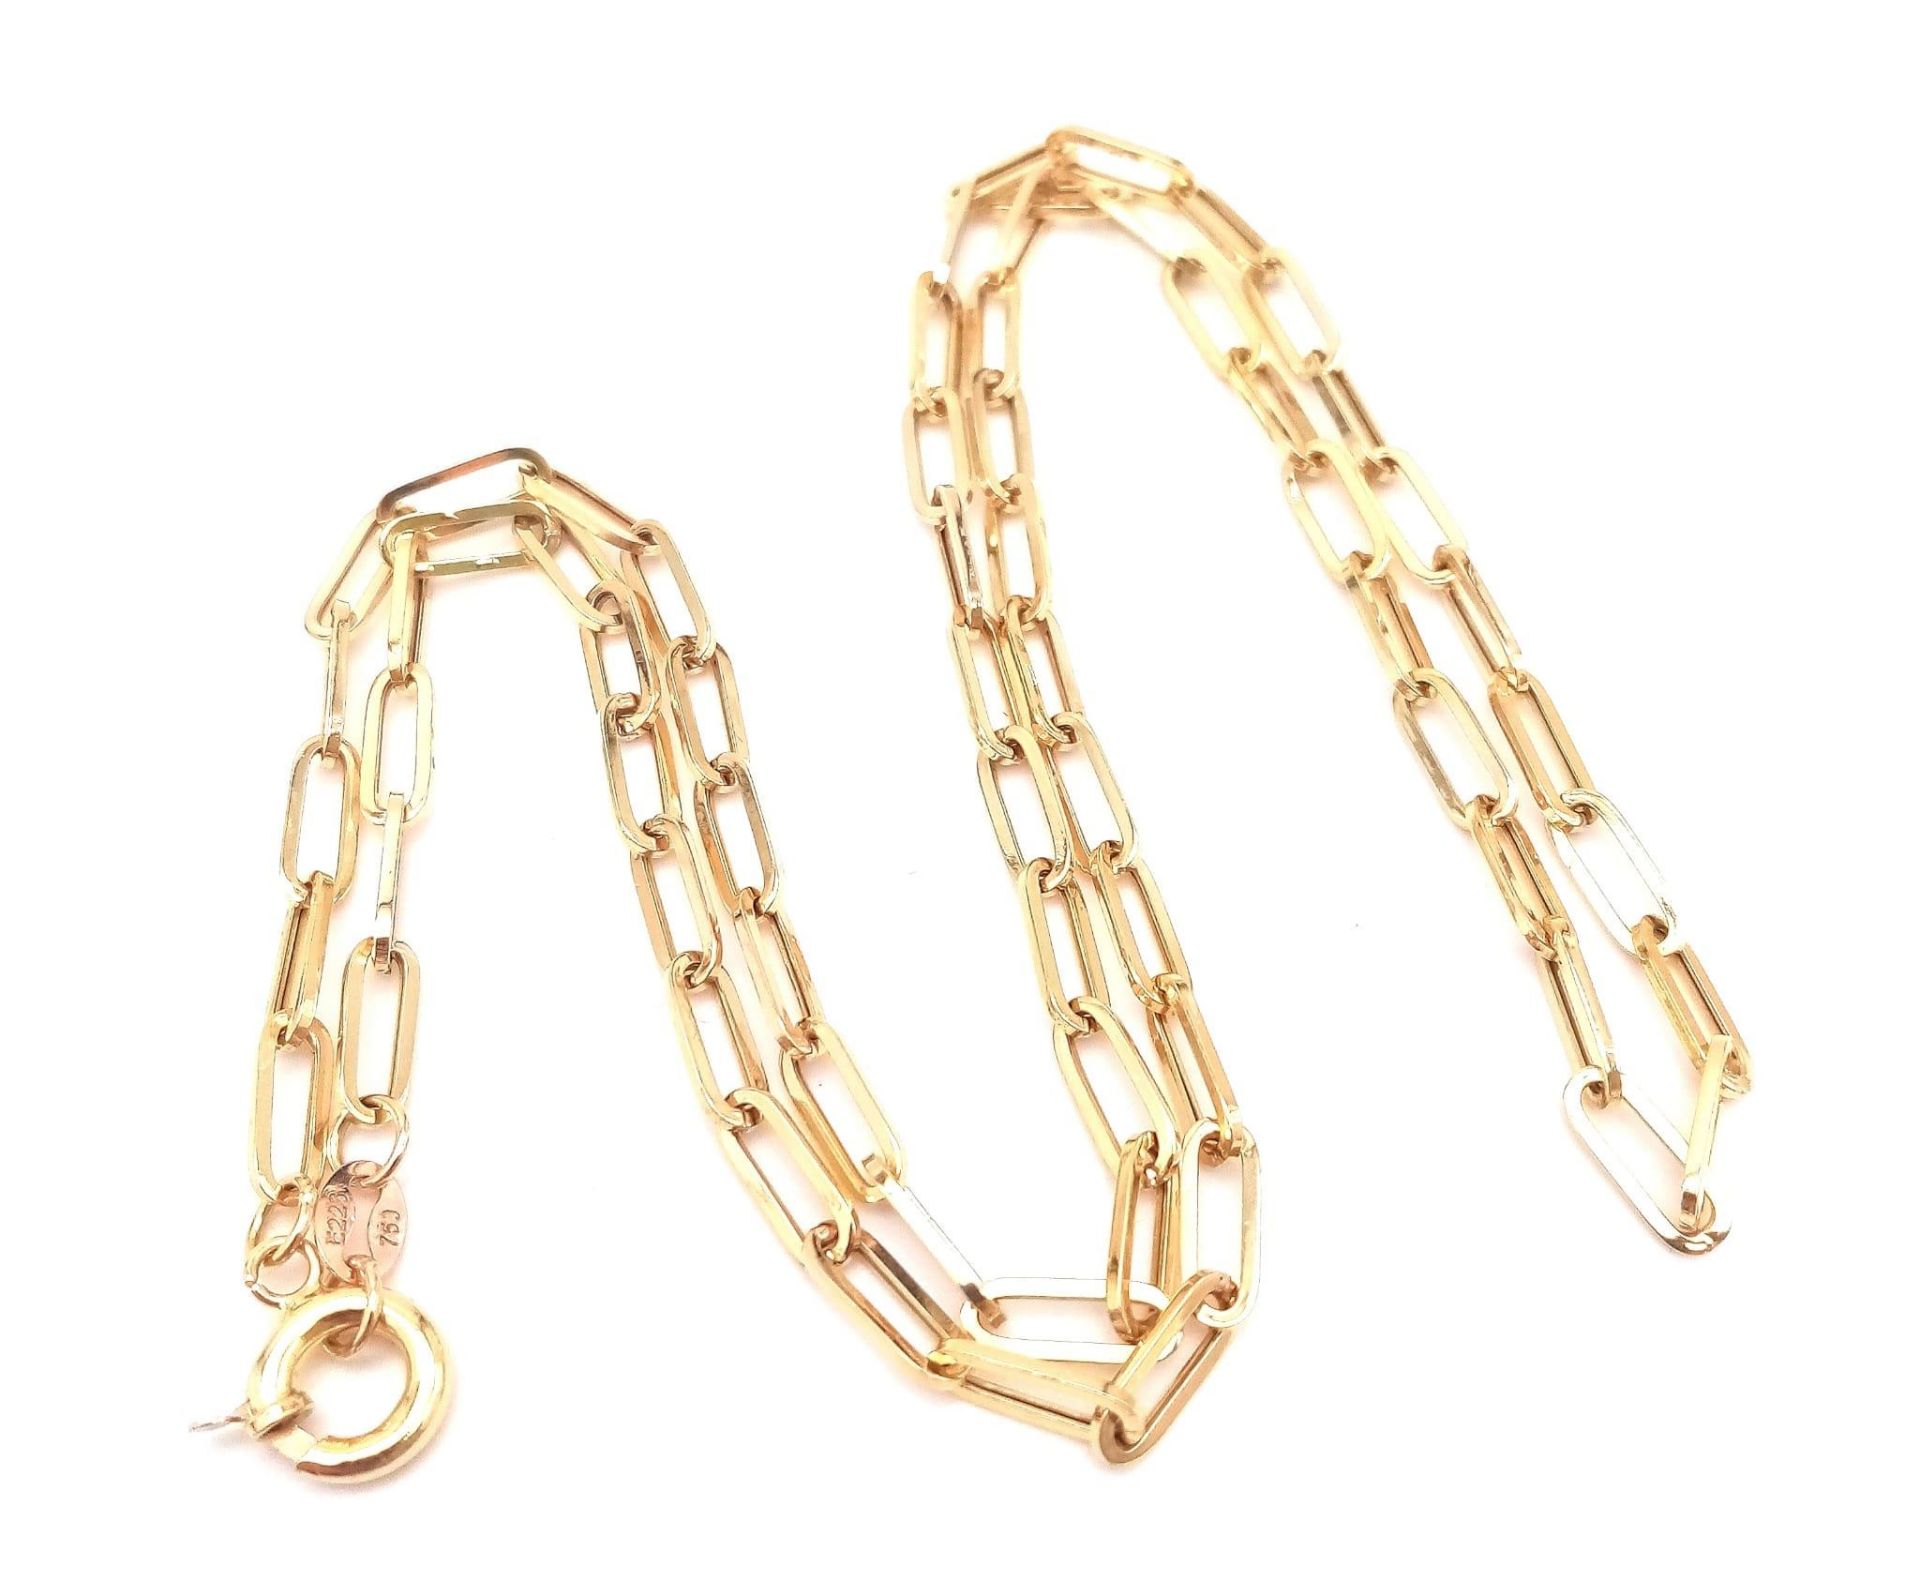 An 18K Yellow Gold Elongated Link Chain. 56cm length. 5.5g weight. - Image 7 of 9